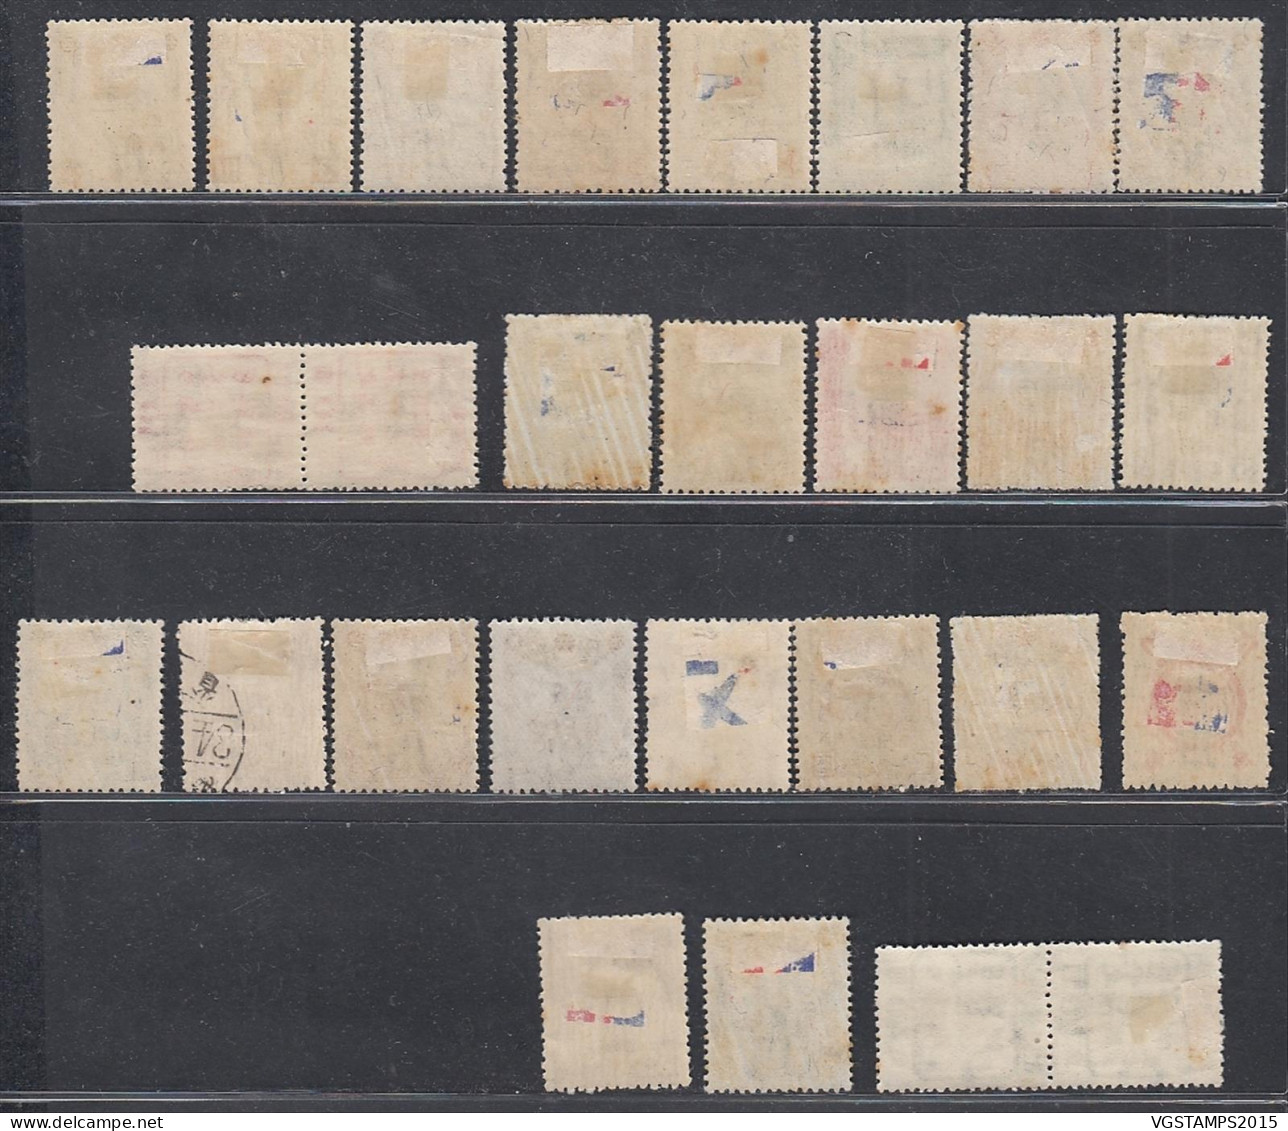 Chine 1945 - Surcharges Locales - Nord Est Province-SHUN YANG- Timbres  Avec Charnière. Nr.: 1/27.... (VG) DC-11942 - North-Eastern 1946-48